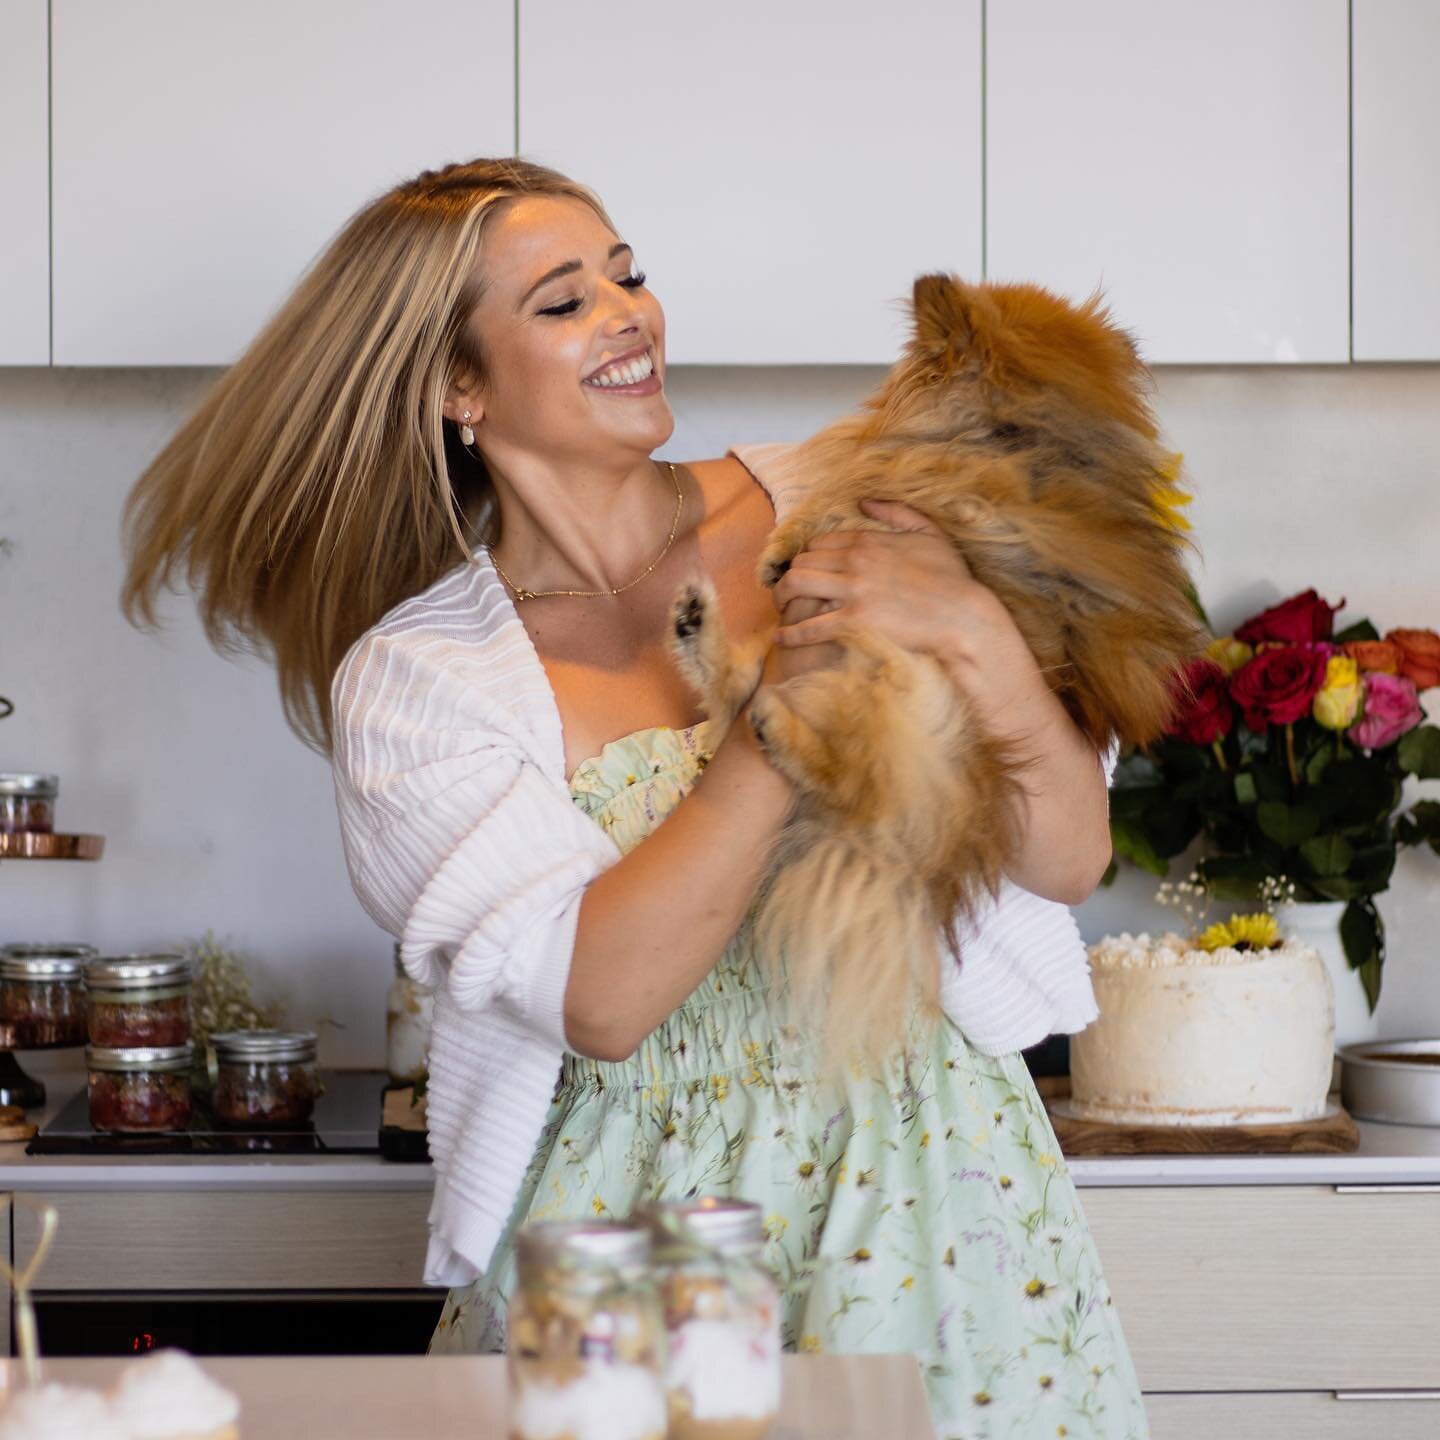 MOOD when you get to bake a little something for THE @jillian.harris 🤍🥹💃😭🥰 my favourite part is of course that she zoomed in on my lil superstar Alfie boy! 💫 We are one grateful and happy little pair 🤍
-
#VeganBaking #VeganBakedGoods